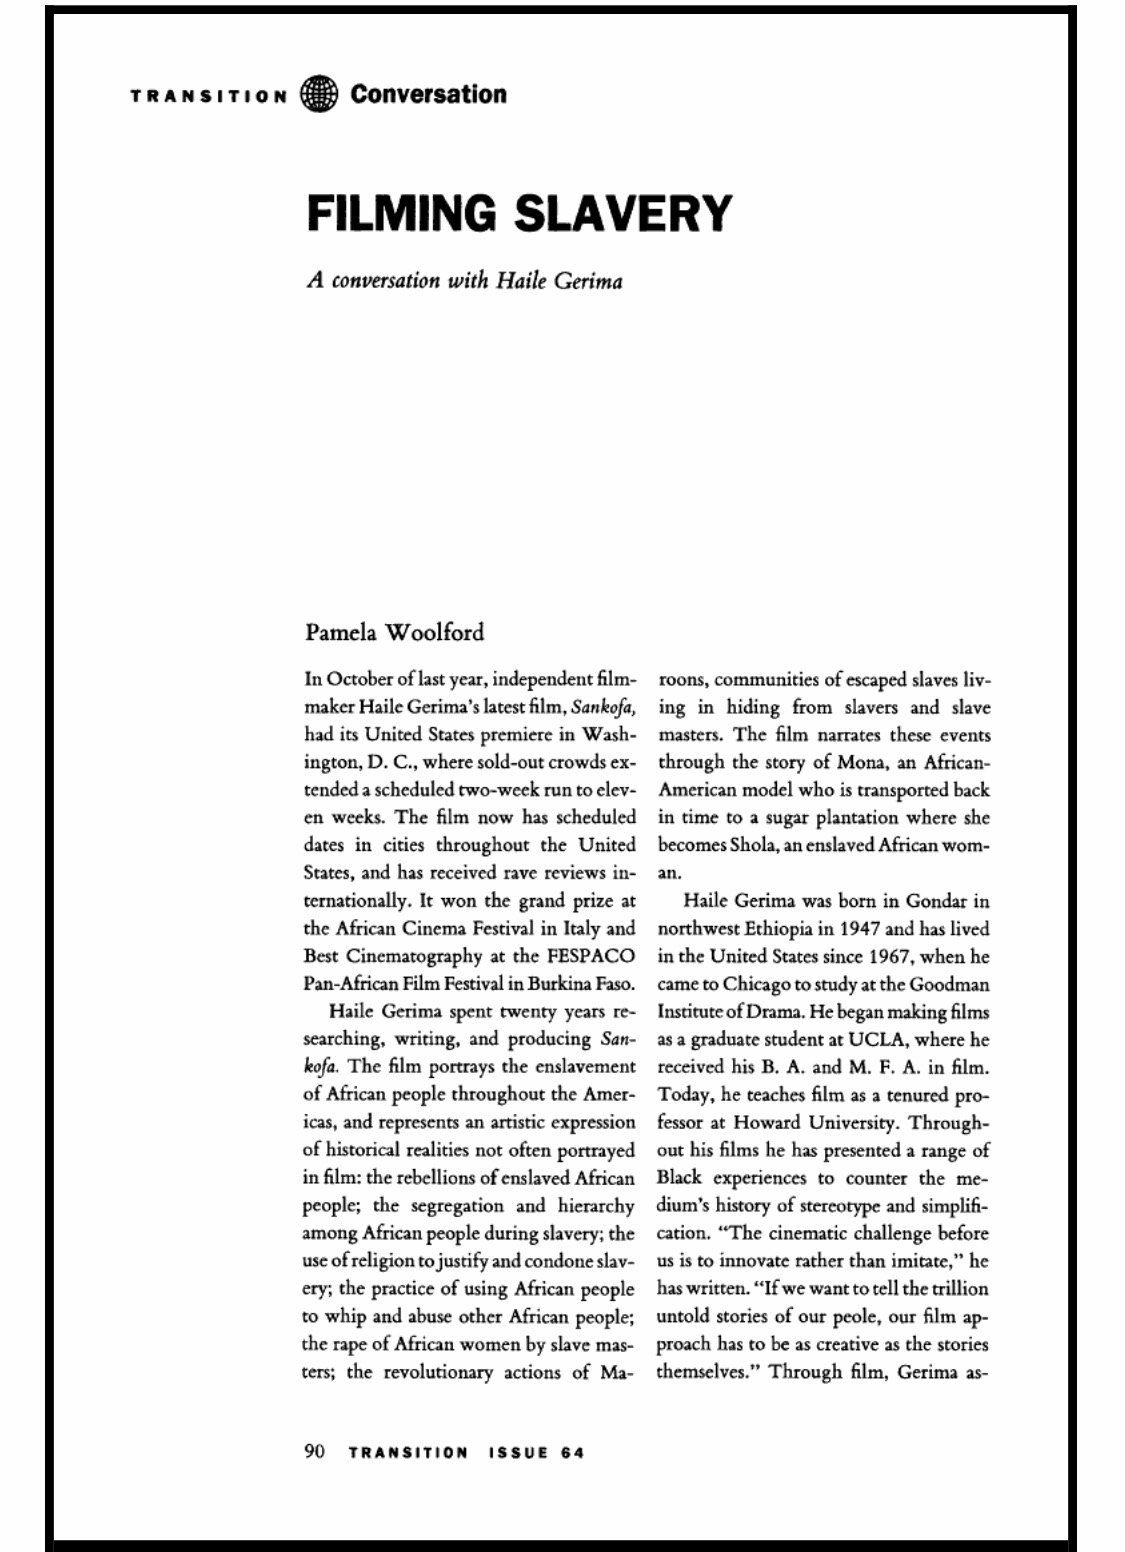 A page from the journal Transition with the headline "Filming Slavery: A conversation with Haile Gerima" and the author's name "Pamela Woolford" and the opening narrative to the interview.